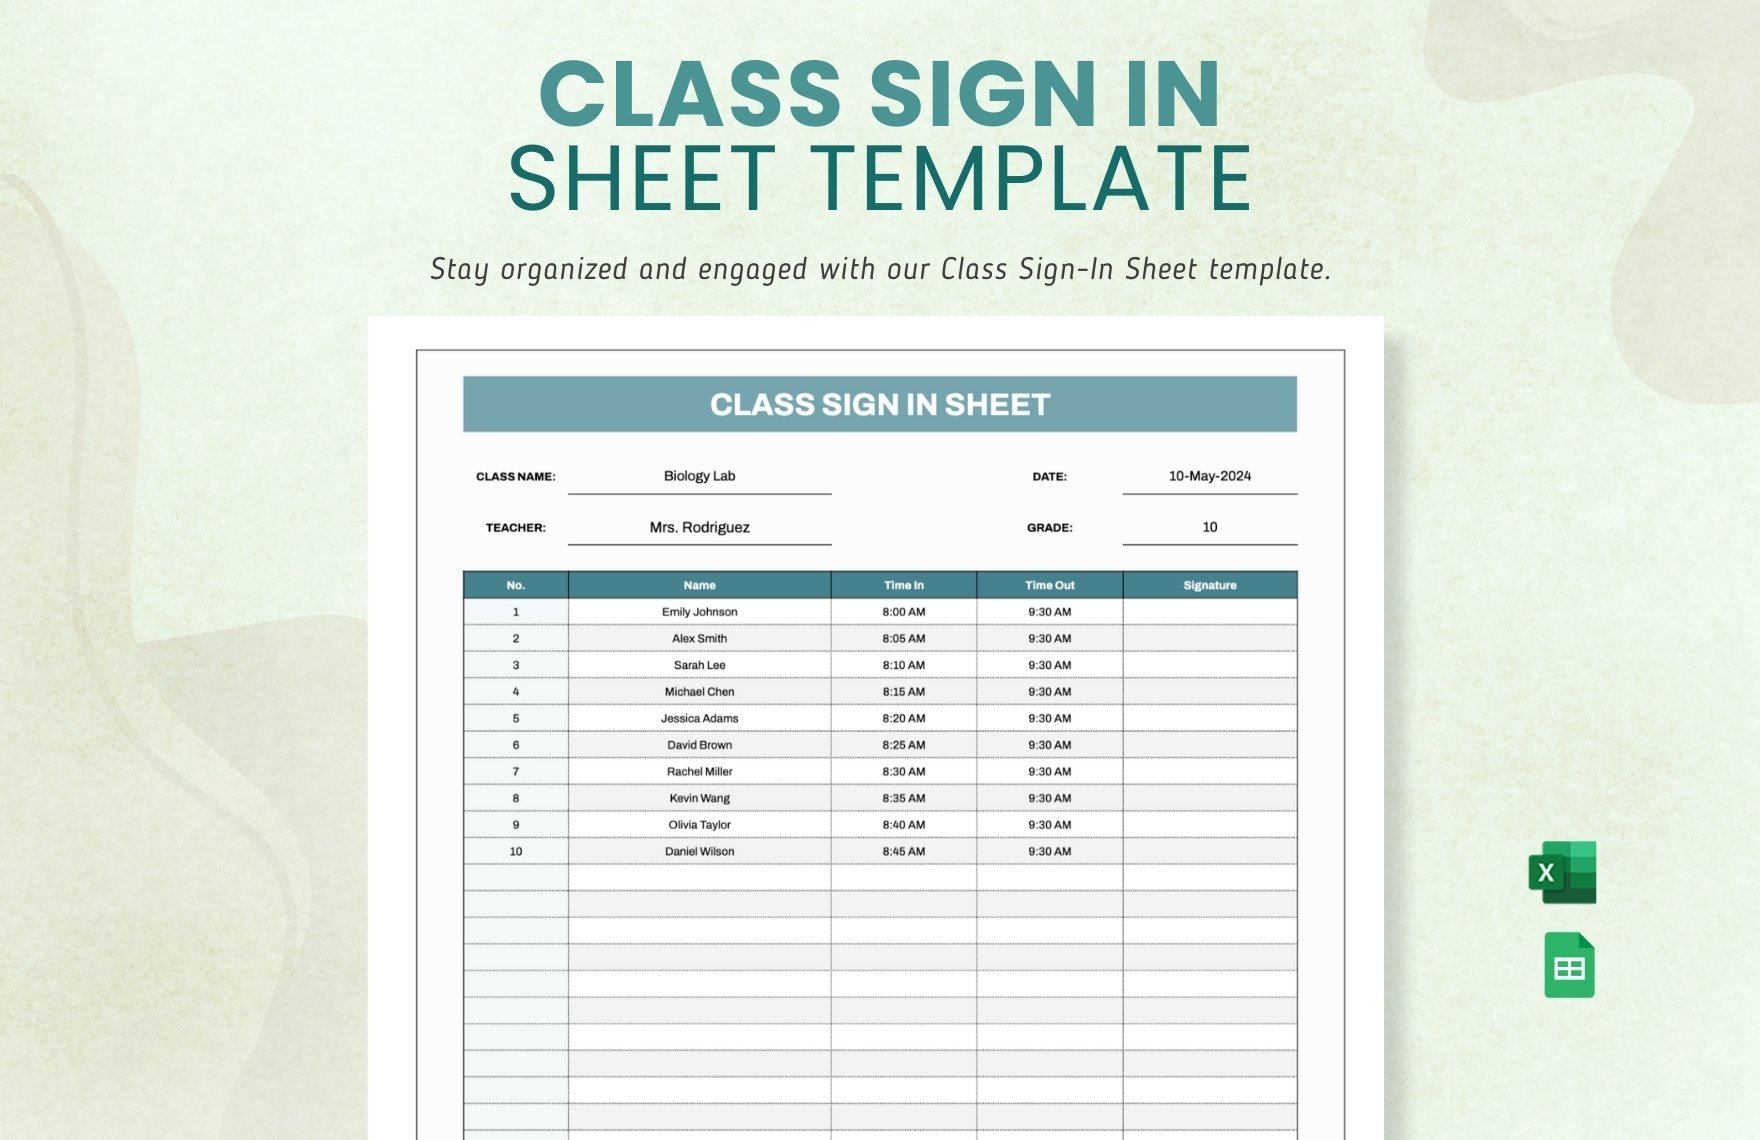 Class Sign in Sheet Template in Excel, Google Sheets